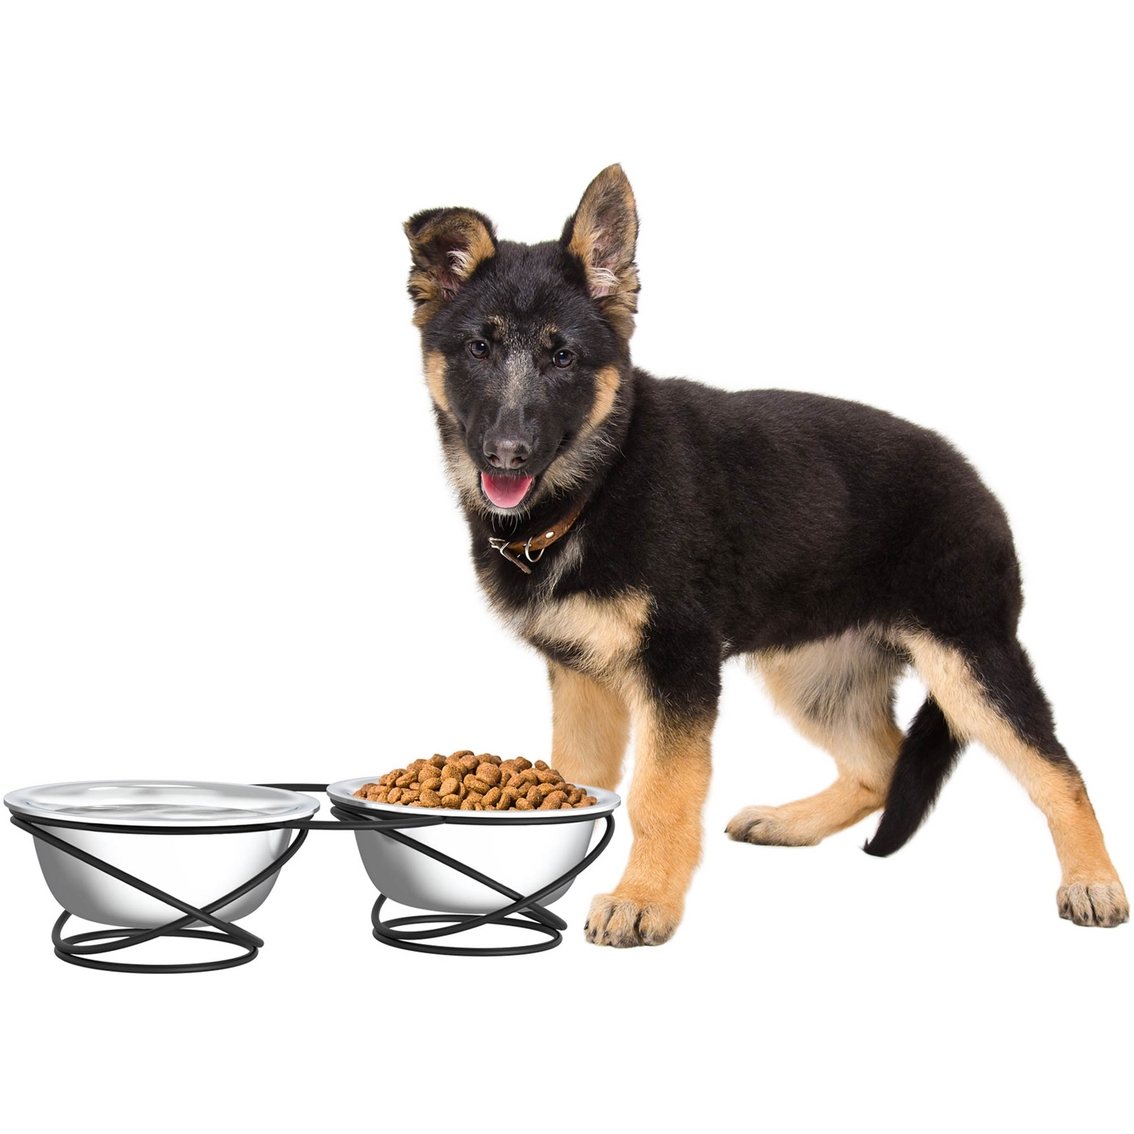 PETMAKER Stainless Steel Raised Food and Water Bowls with Decorative 3.5 in. Stand - Image 3 of 3